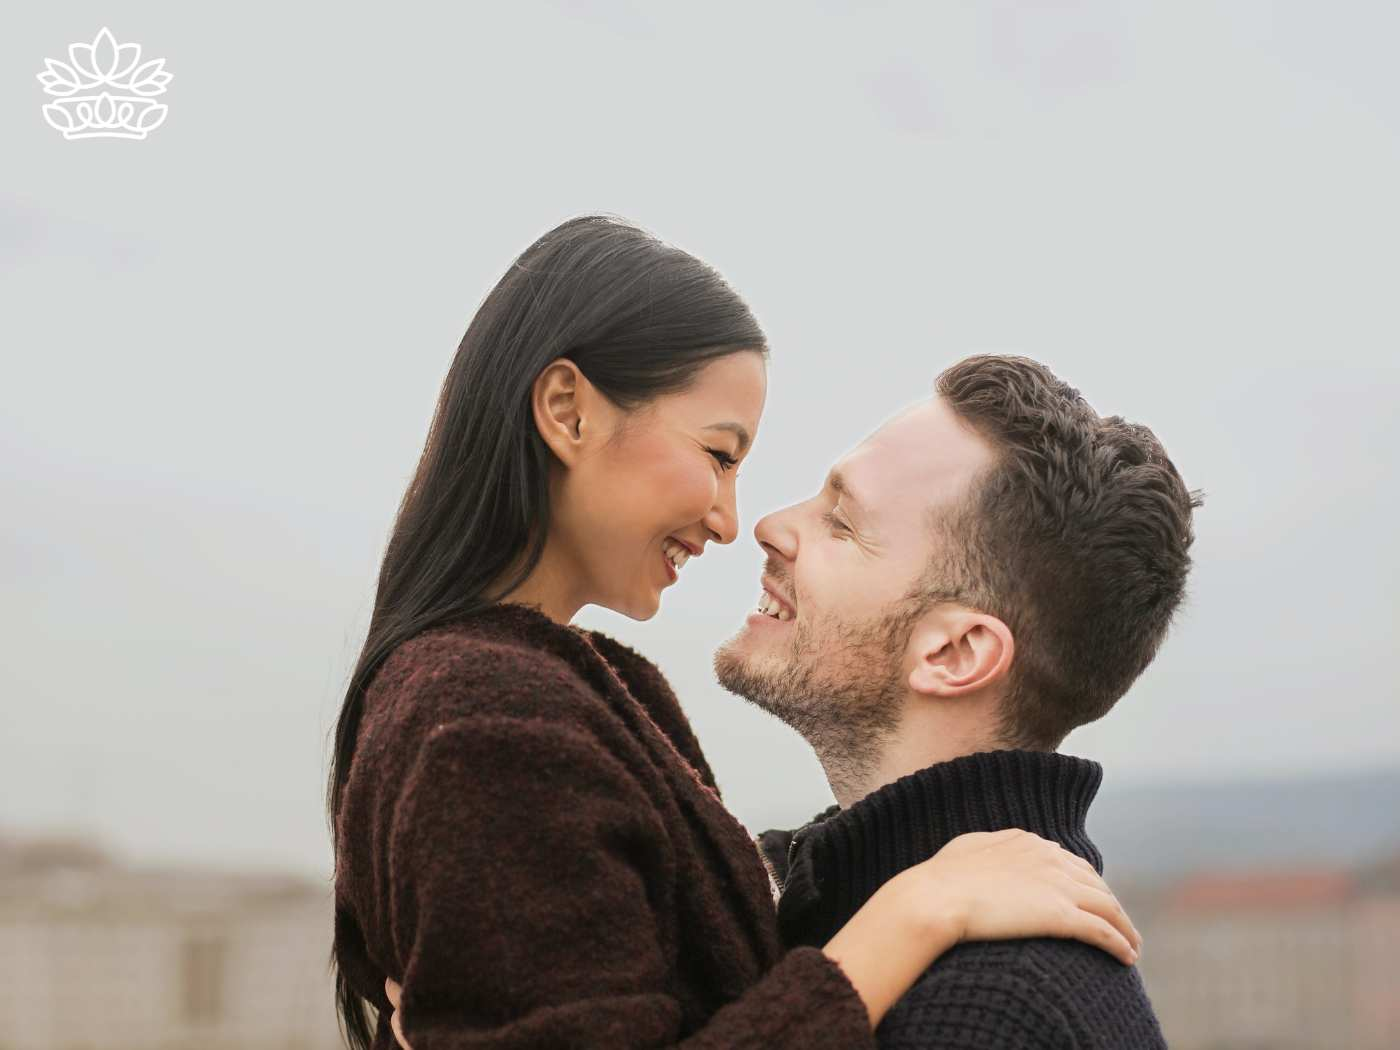 Joyful couple sharing a loving embrace outdoors, smiling at each other with genuine happiness and affection, set against a soft, muted background. Fabulous Flowers and Gifts. Delivered with Heart.